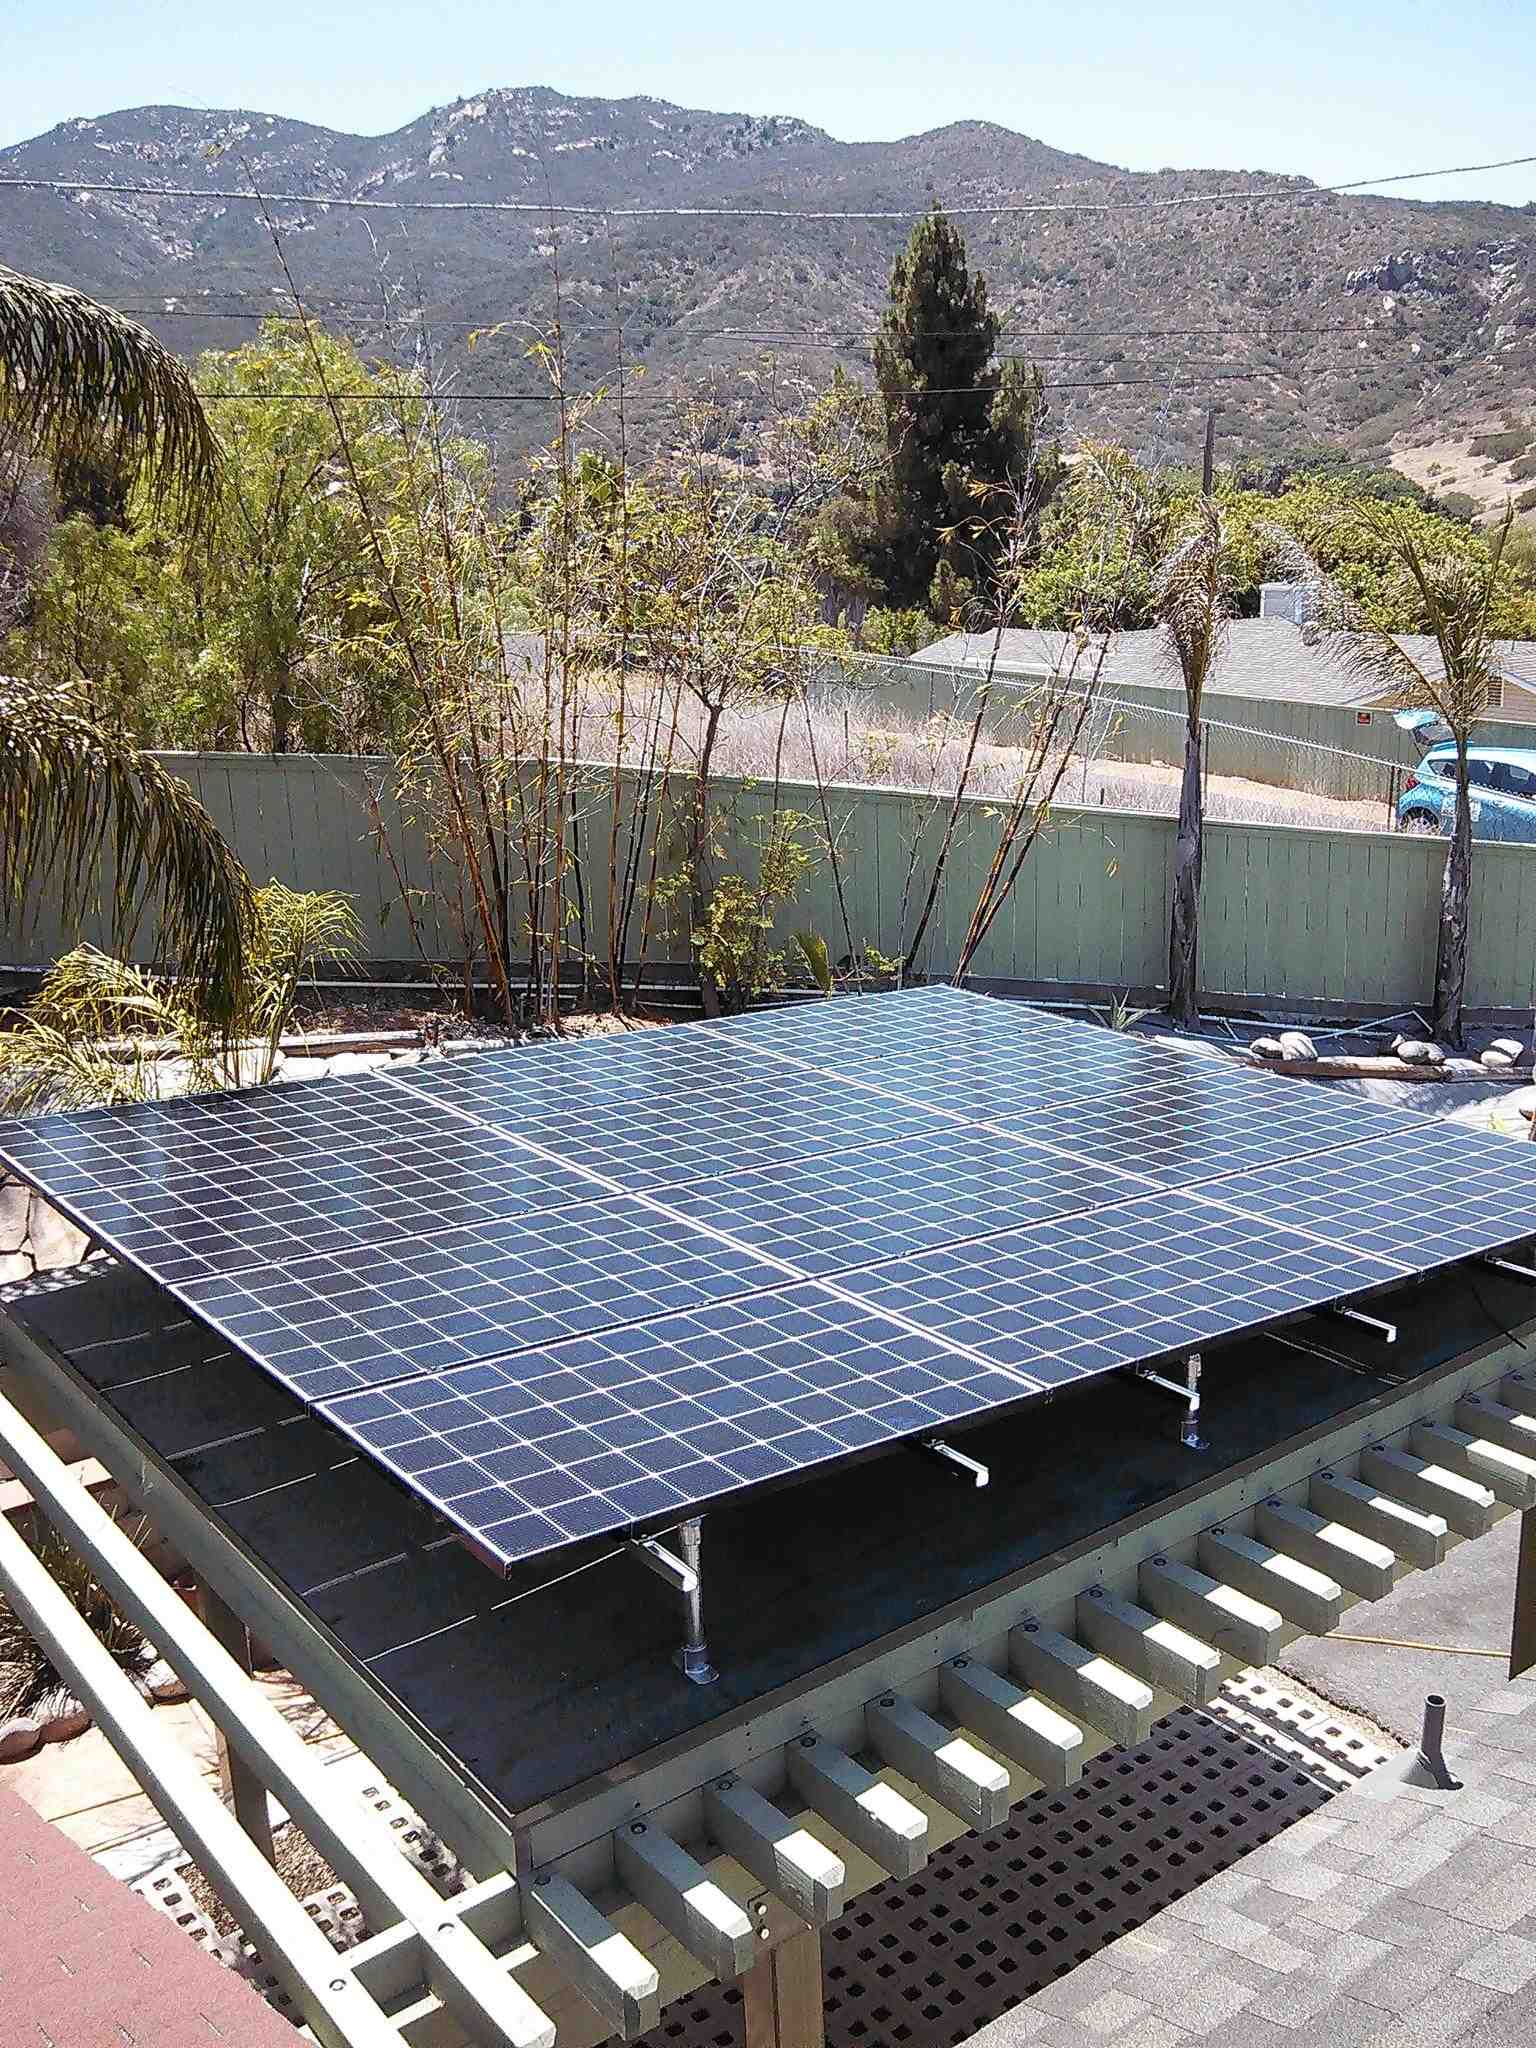 How much does it cost to put solar panels on your roof?